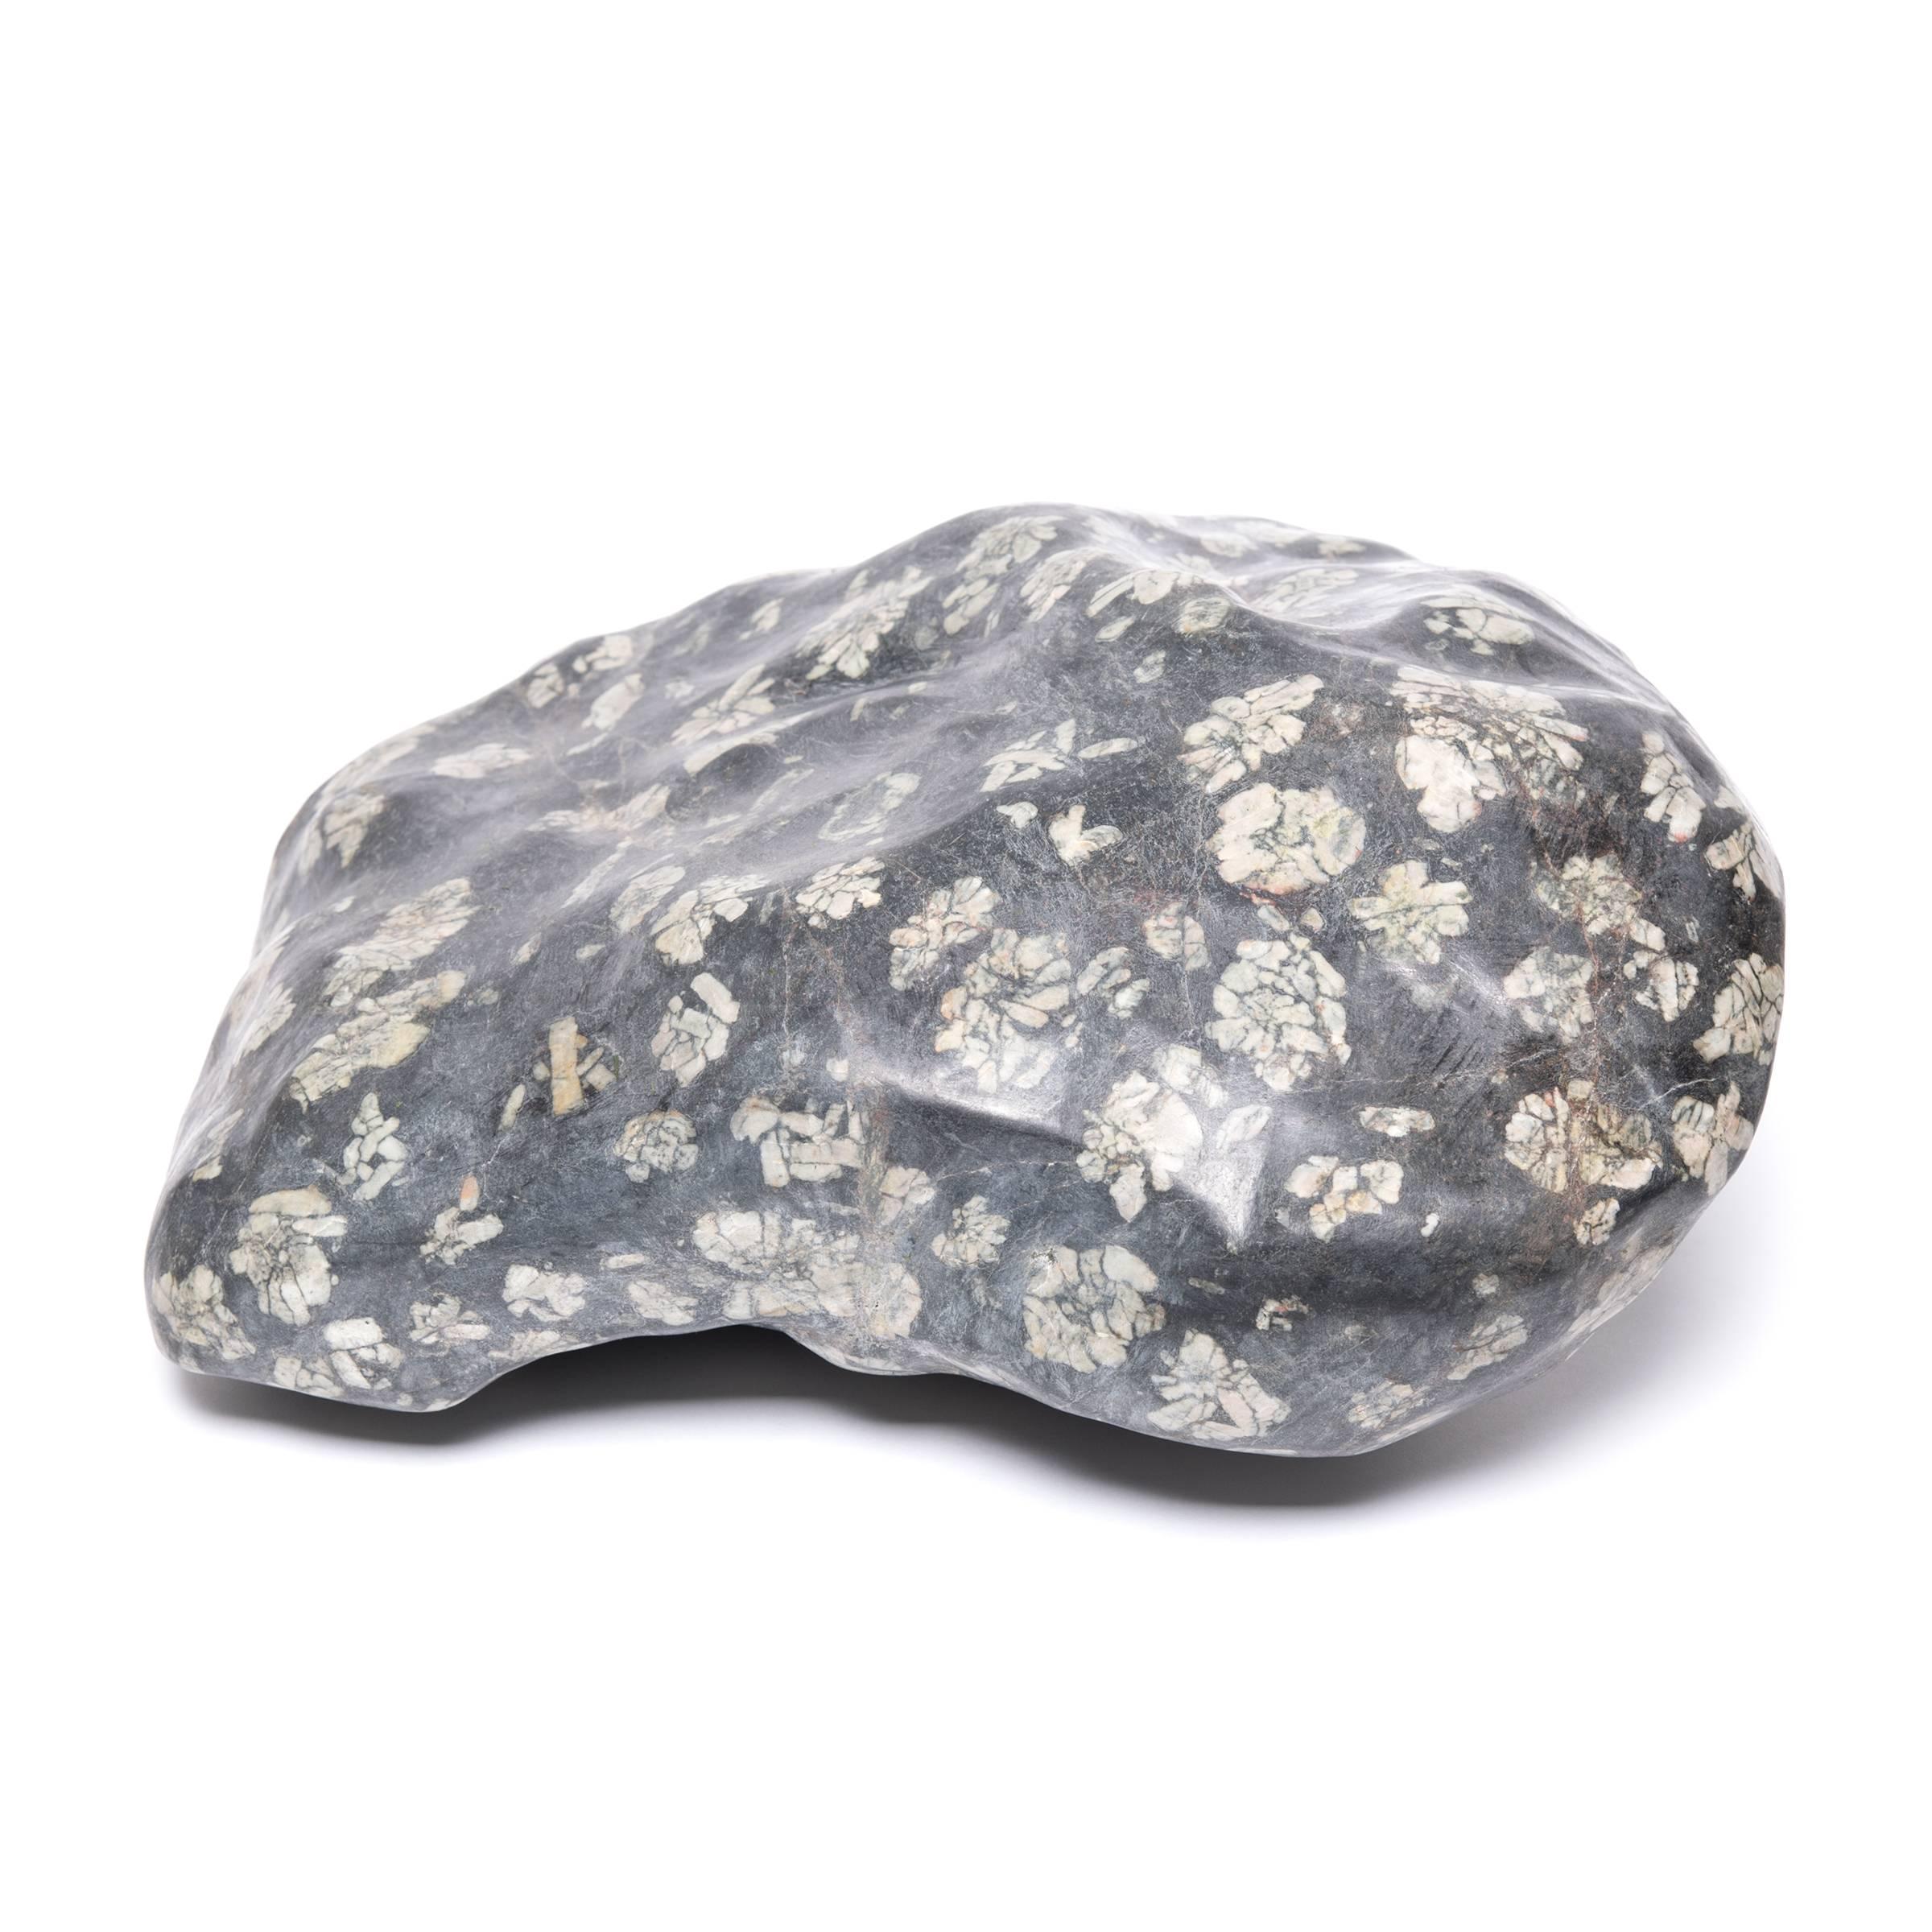 Sourced from Henan province, this amazing stone looks as if it were sprinkled with a flurry of peony blossoms, the result of flower-like aggregates of lighter-colored feldspar incorporated into the stone’s dark, Fine-grained ground. Polished silky